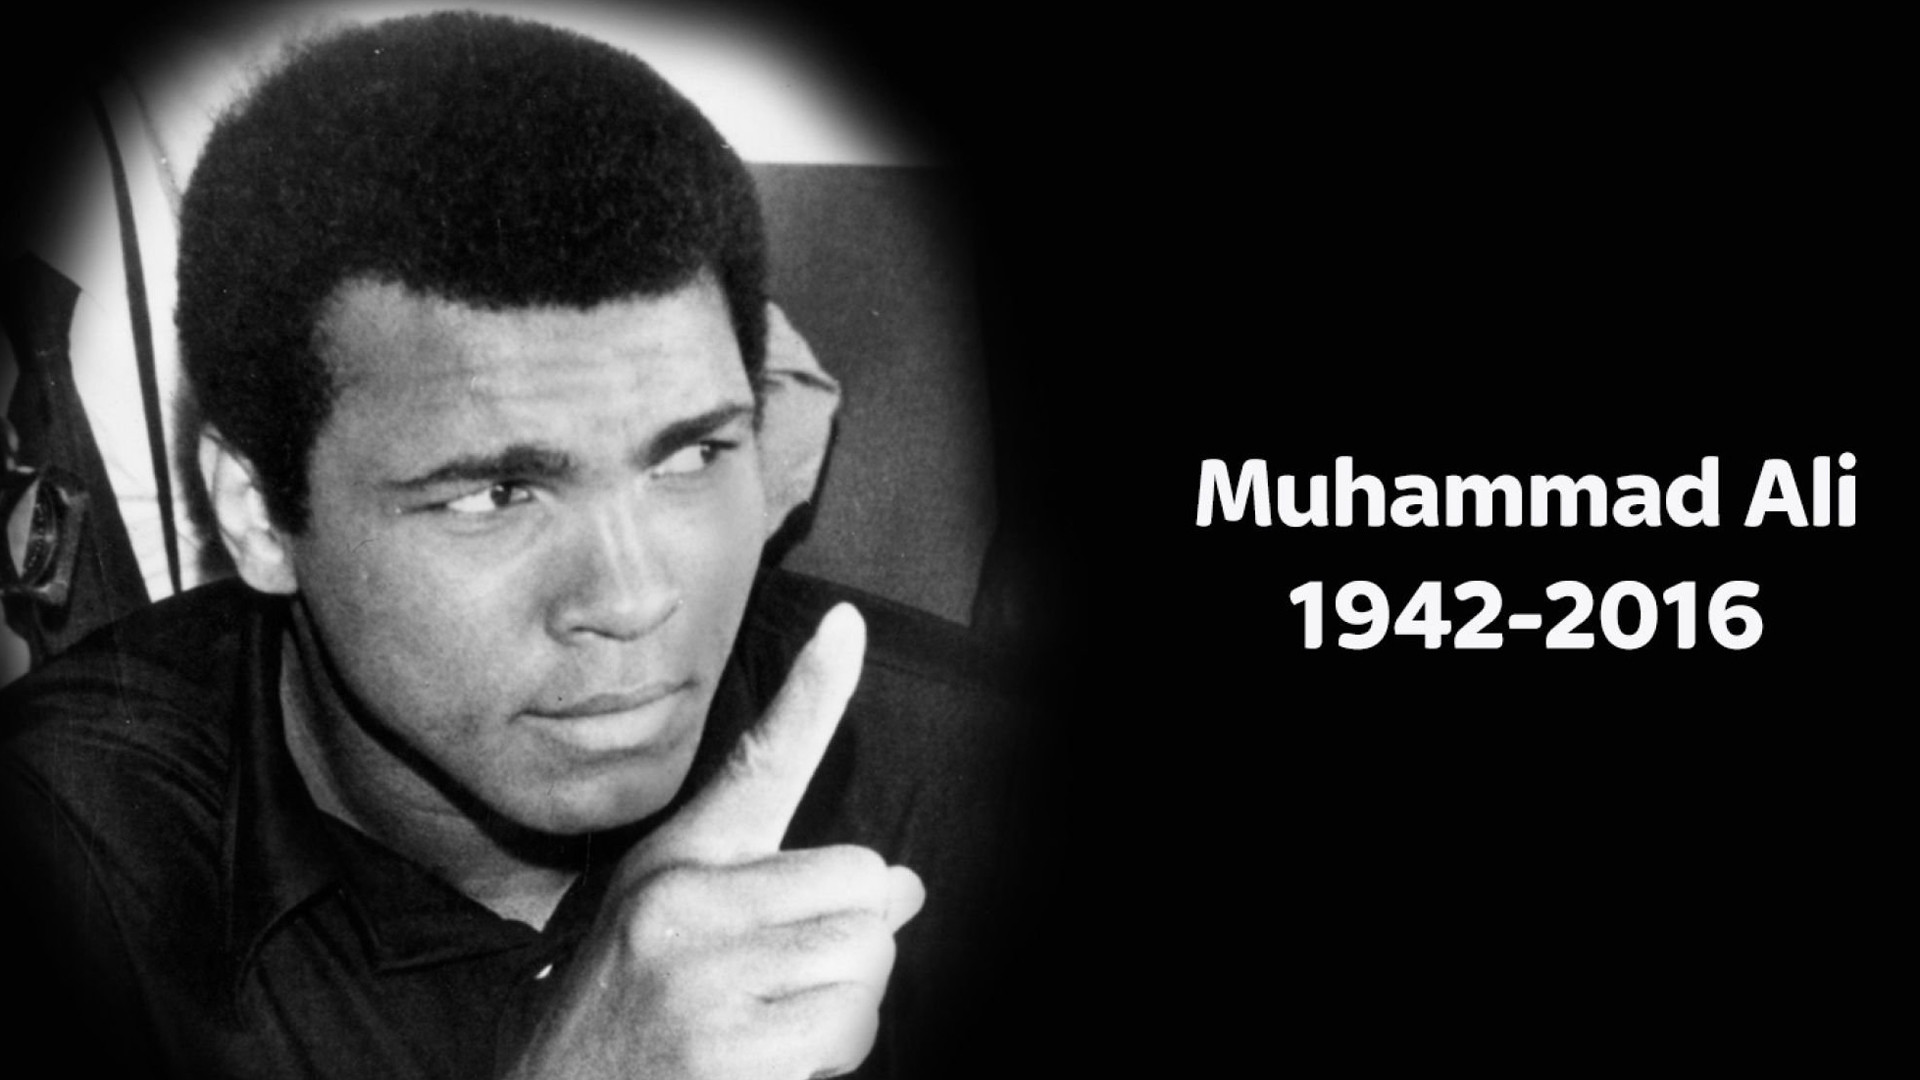 1920x1080 Former heavyweight champion Muhammad Ali has died aged 74 after a 30-year  battle with